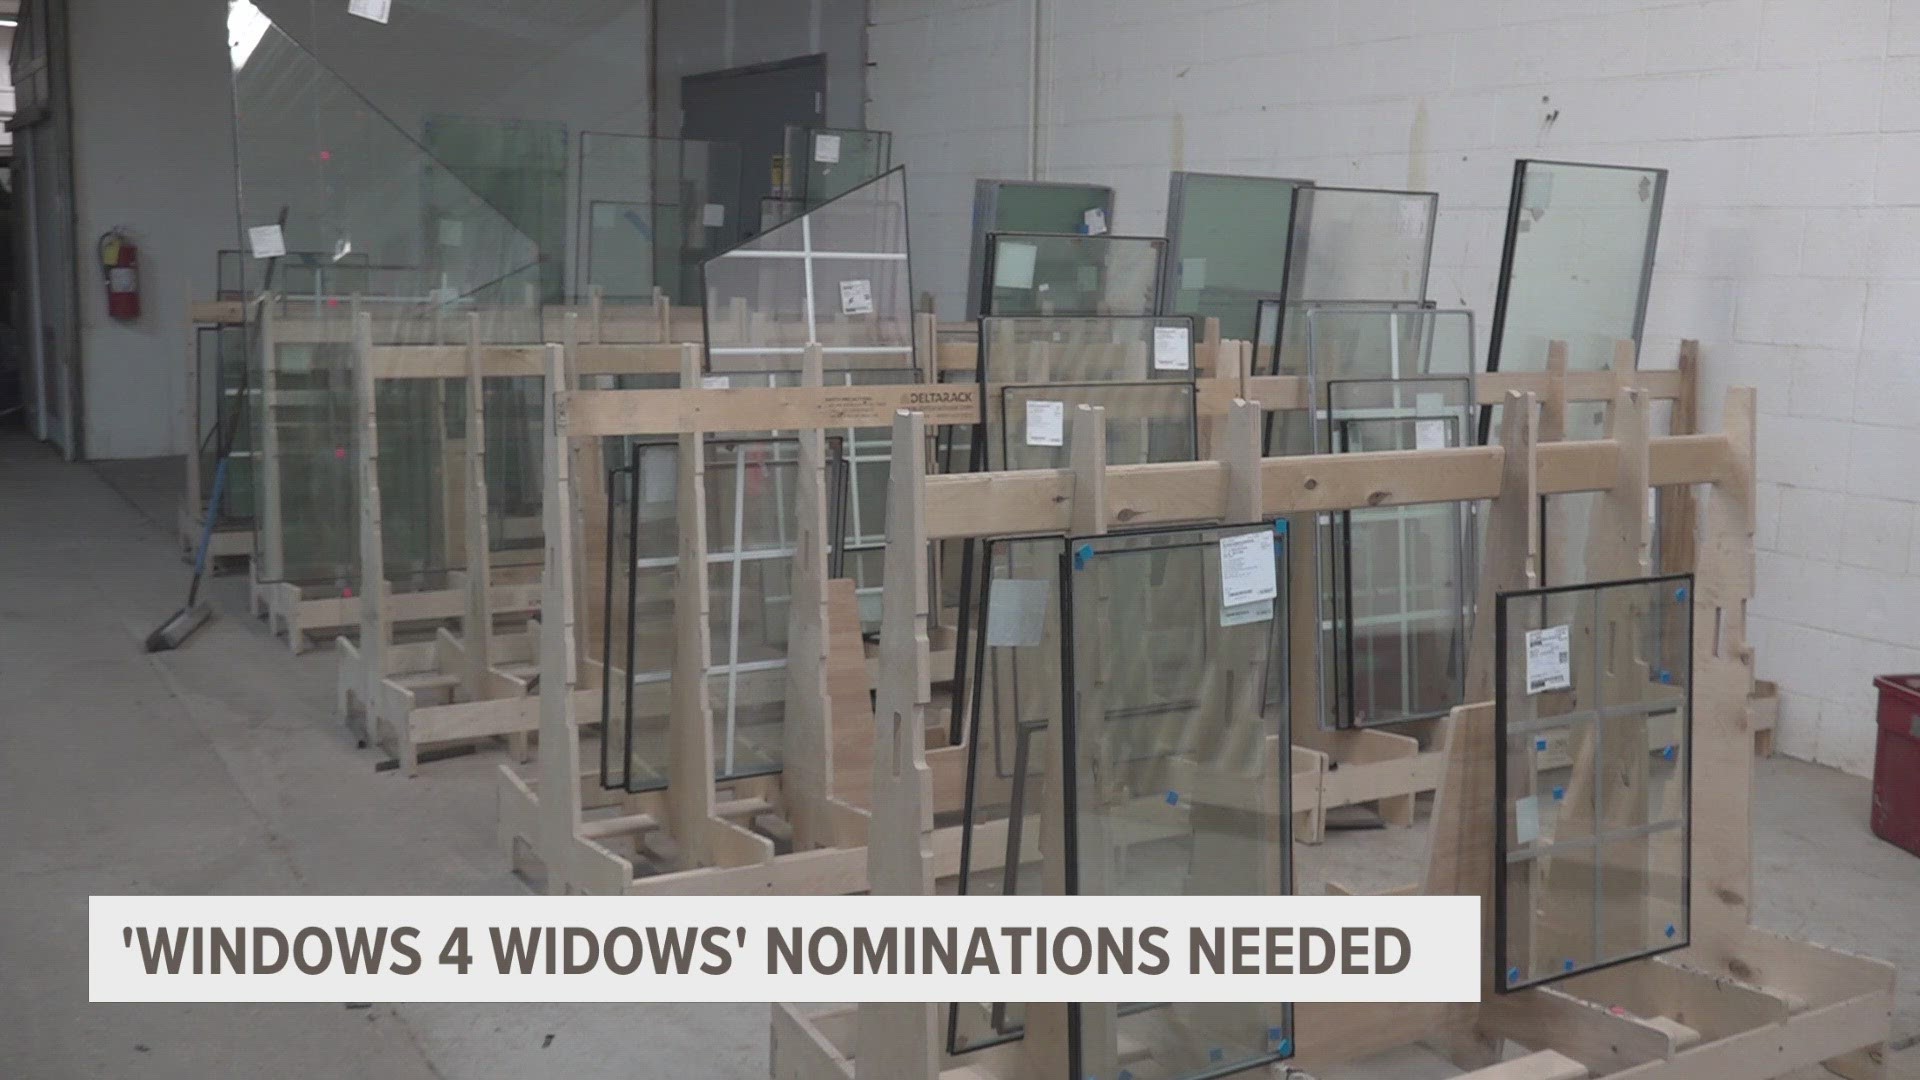 Michigan Screen and Window Repair in Wyoming is asking for nominees to receive window replacements free of charge.